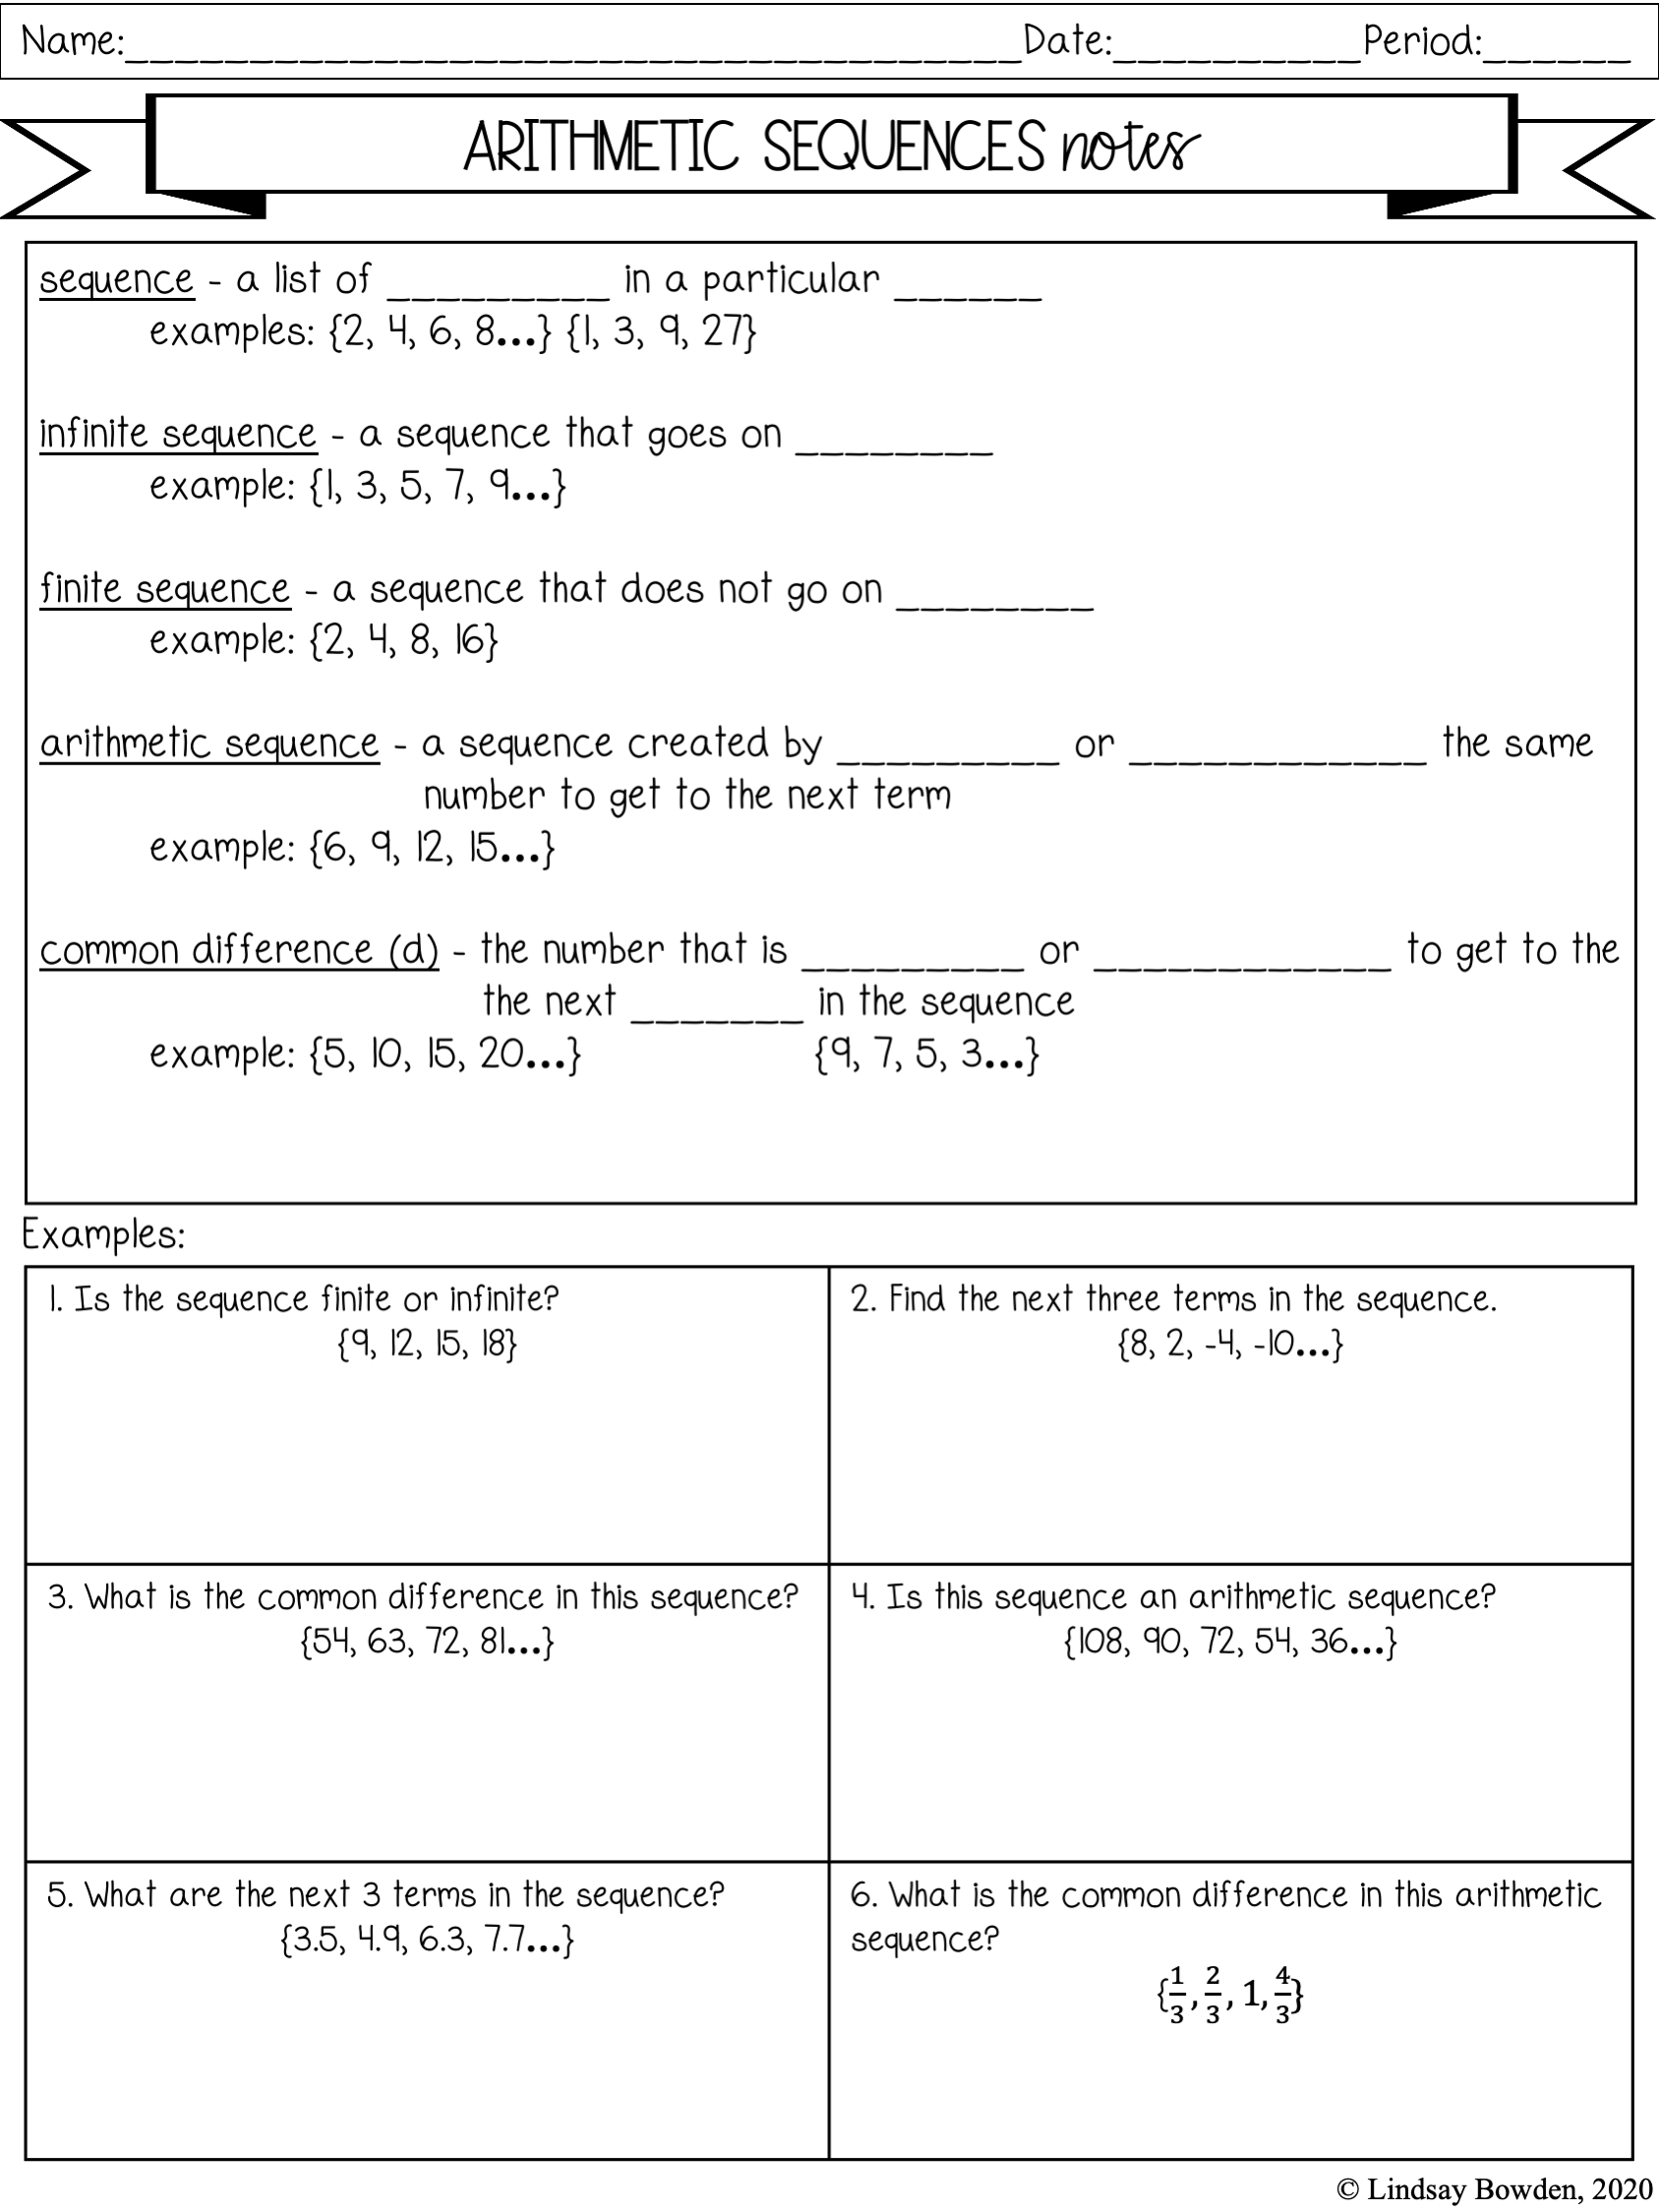 Arithmetic Sequences Notes and Worksheets - Lindsay Bowden In Arithmetic Sequences Worksheet Answers